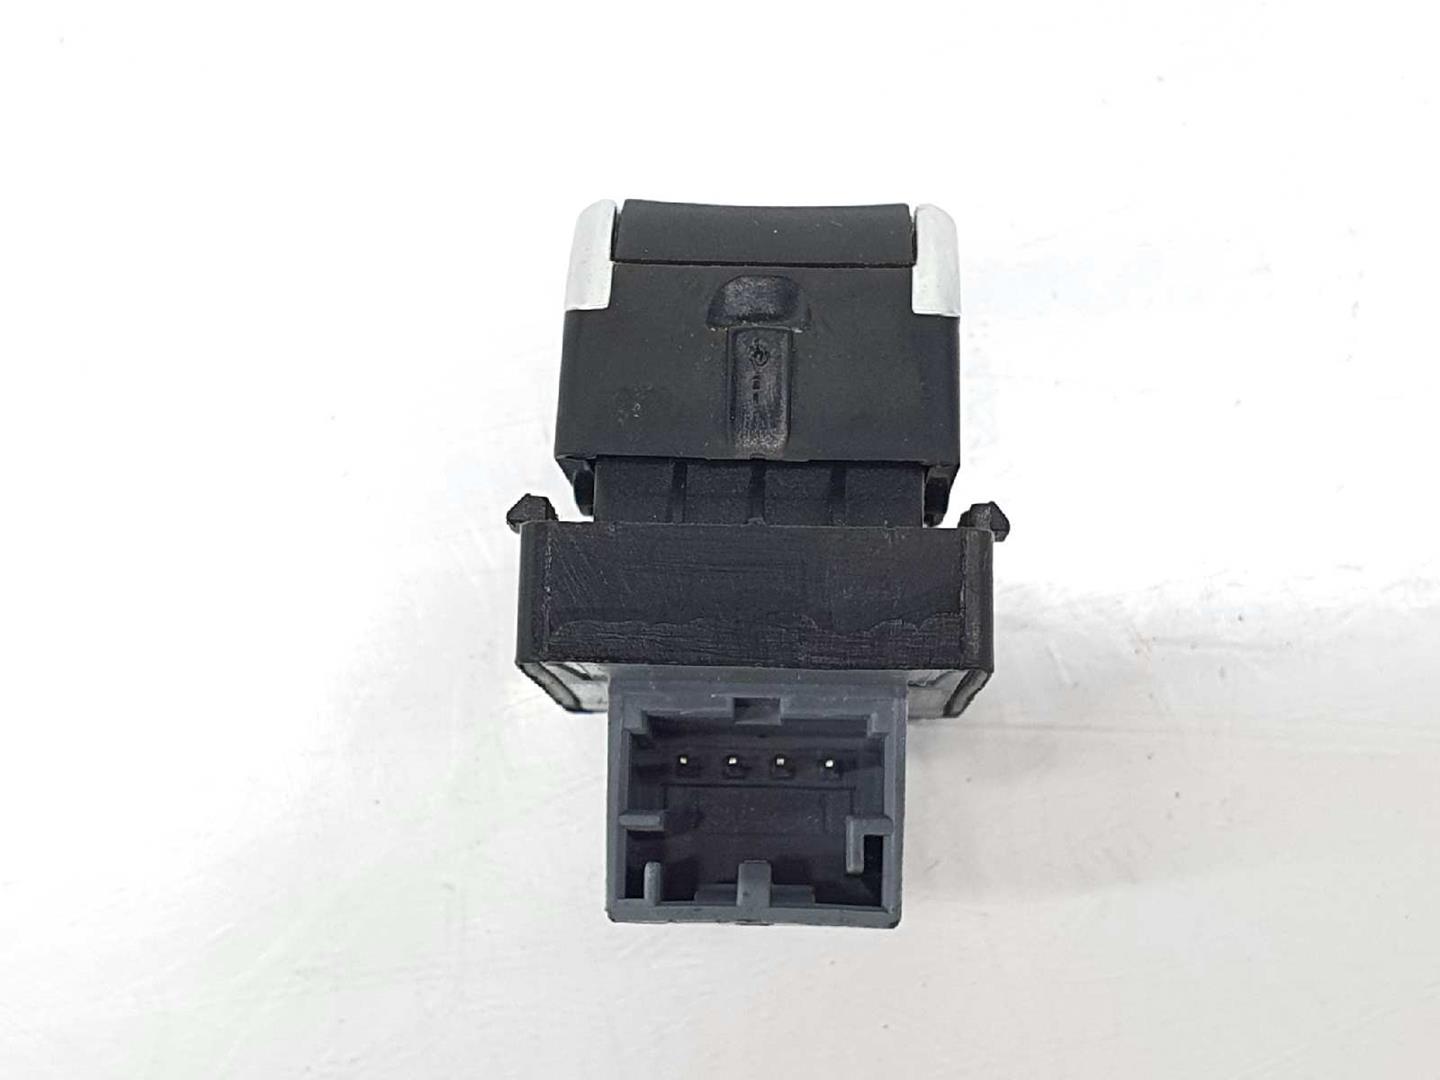 AUDI Q3 8U (2011-2020) Front Right Door Window Switch 4H0959855A, 4H0959855A 19627665